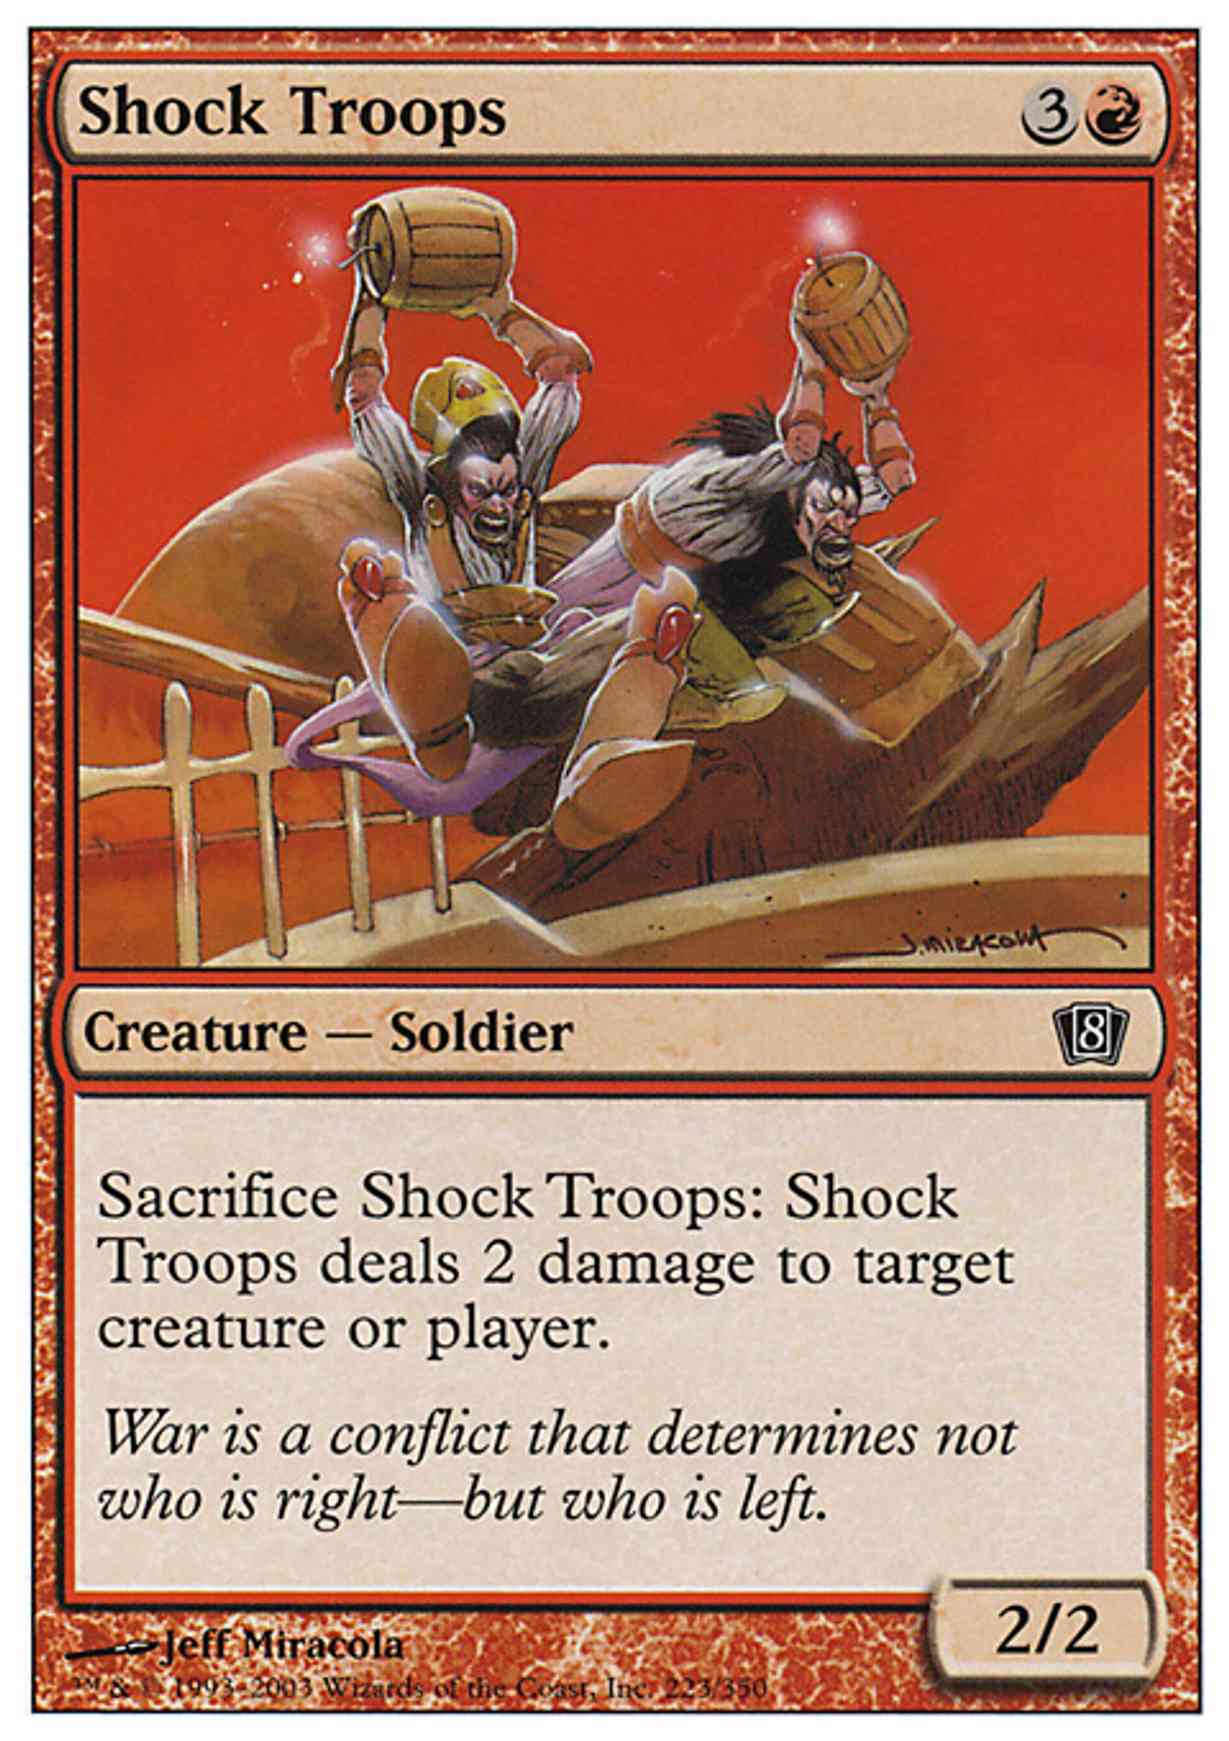 Shock Troops magic card front